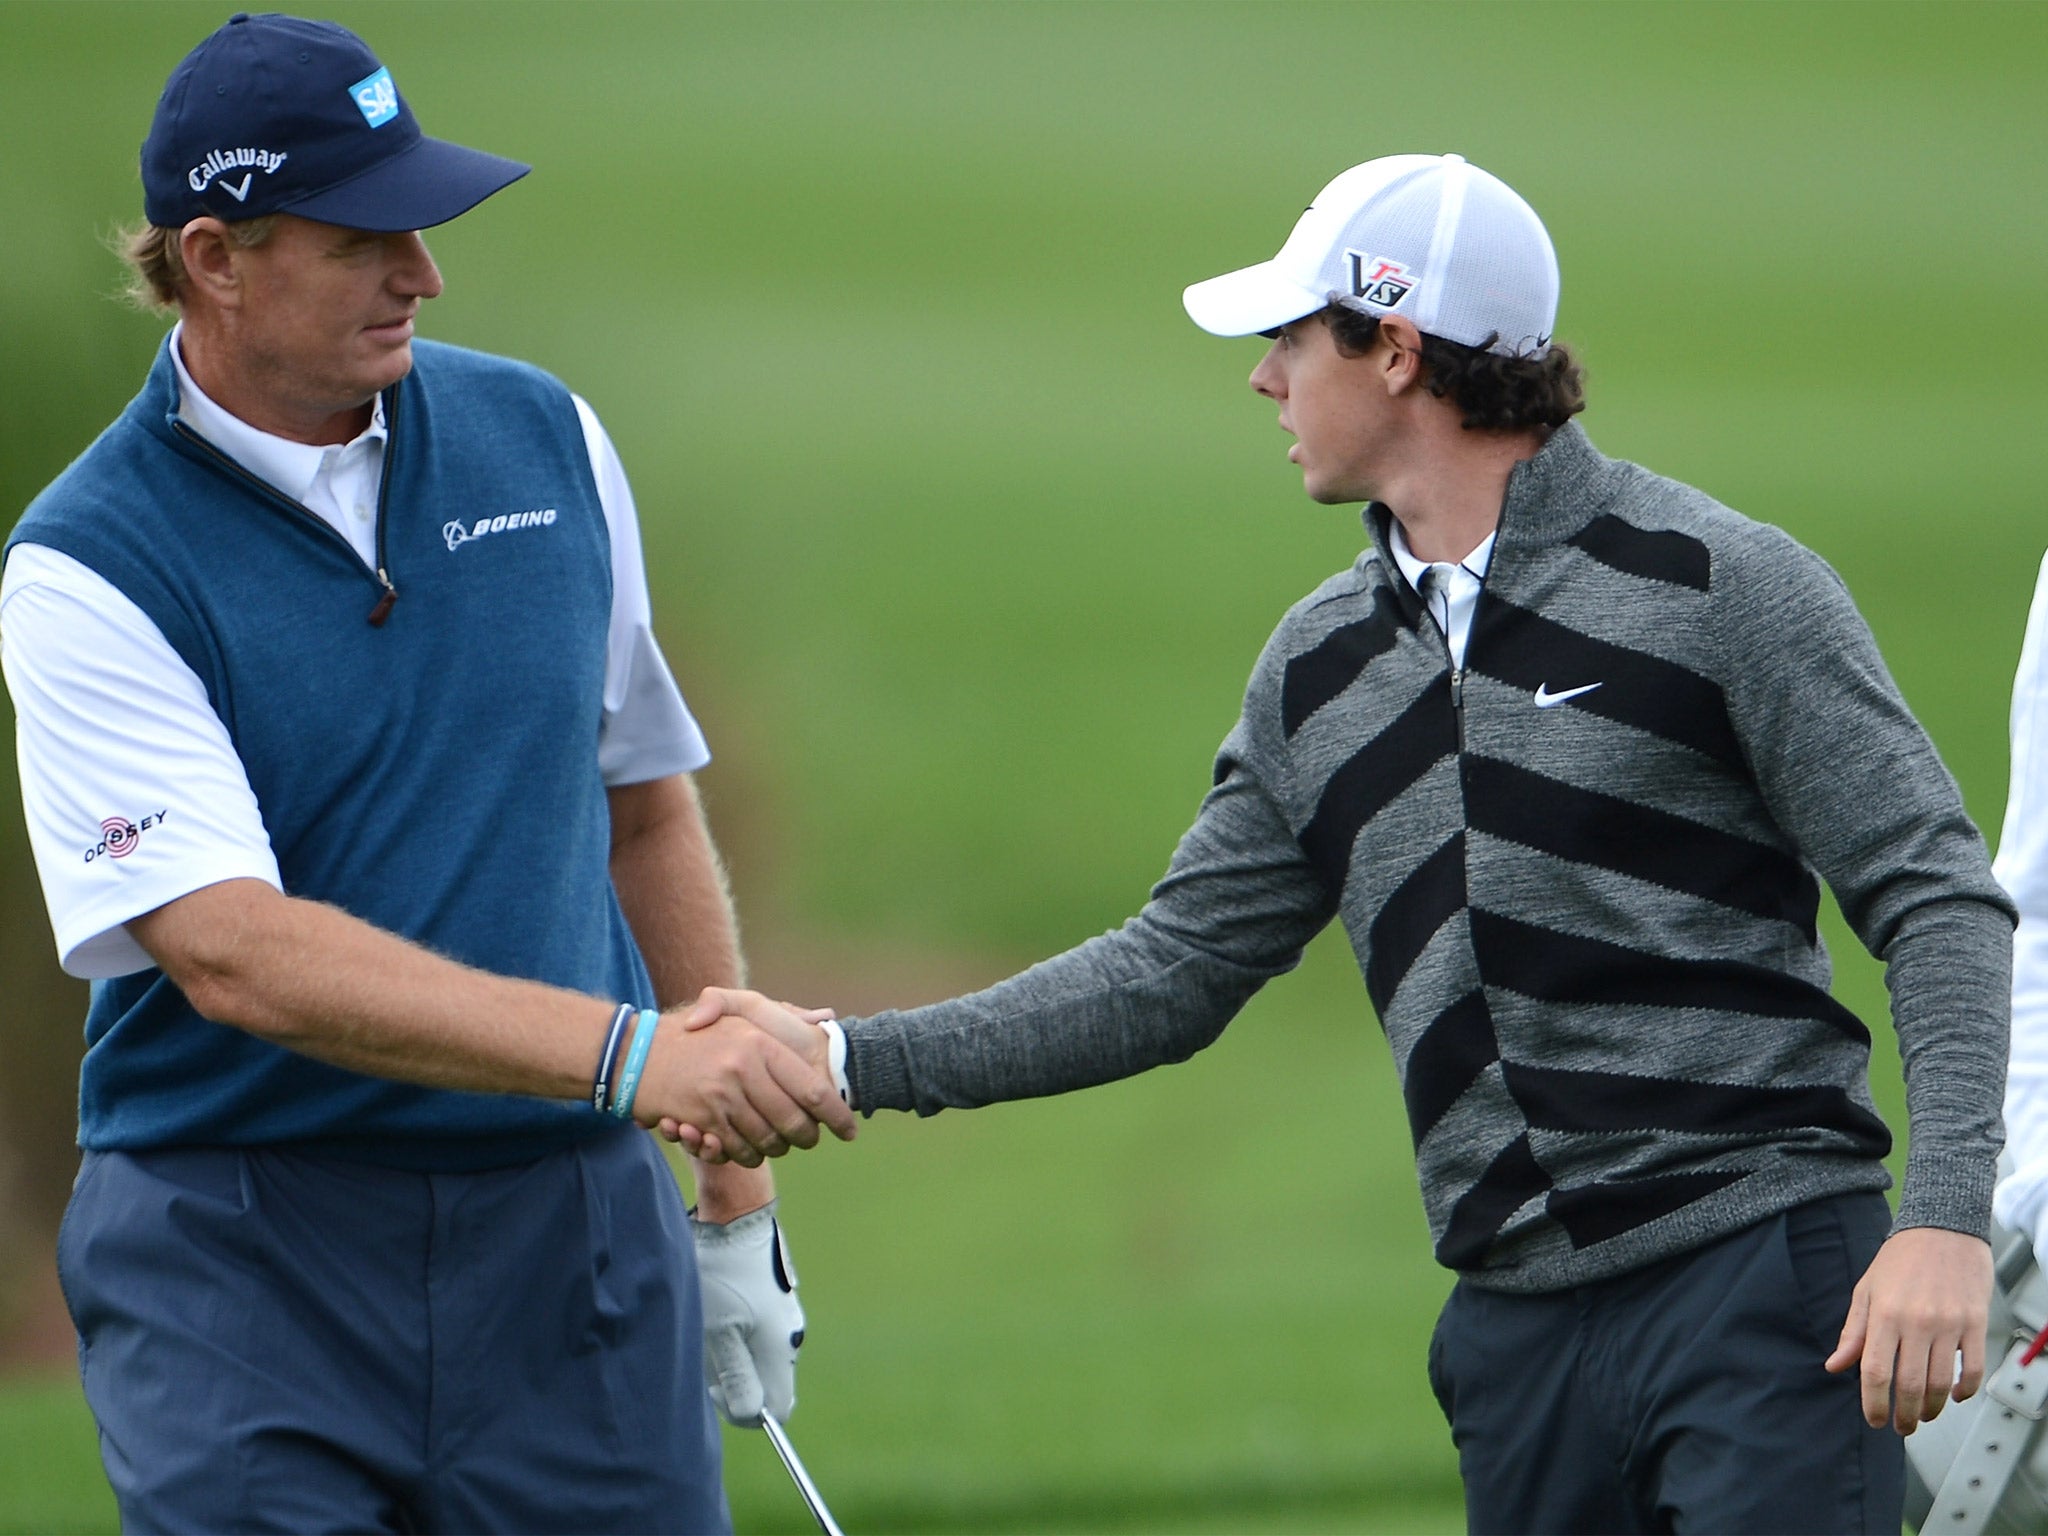 Ernie Els (left) said Rory McIlroy was ‘a great kid’ and he hoped everyone could ‘move on’